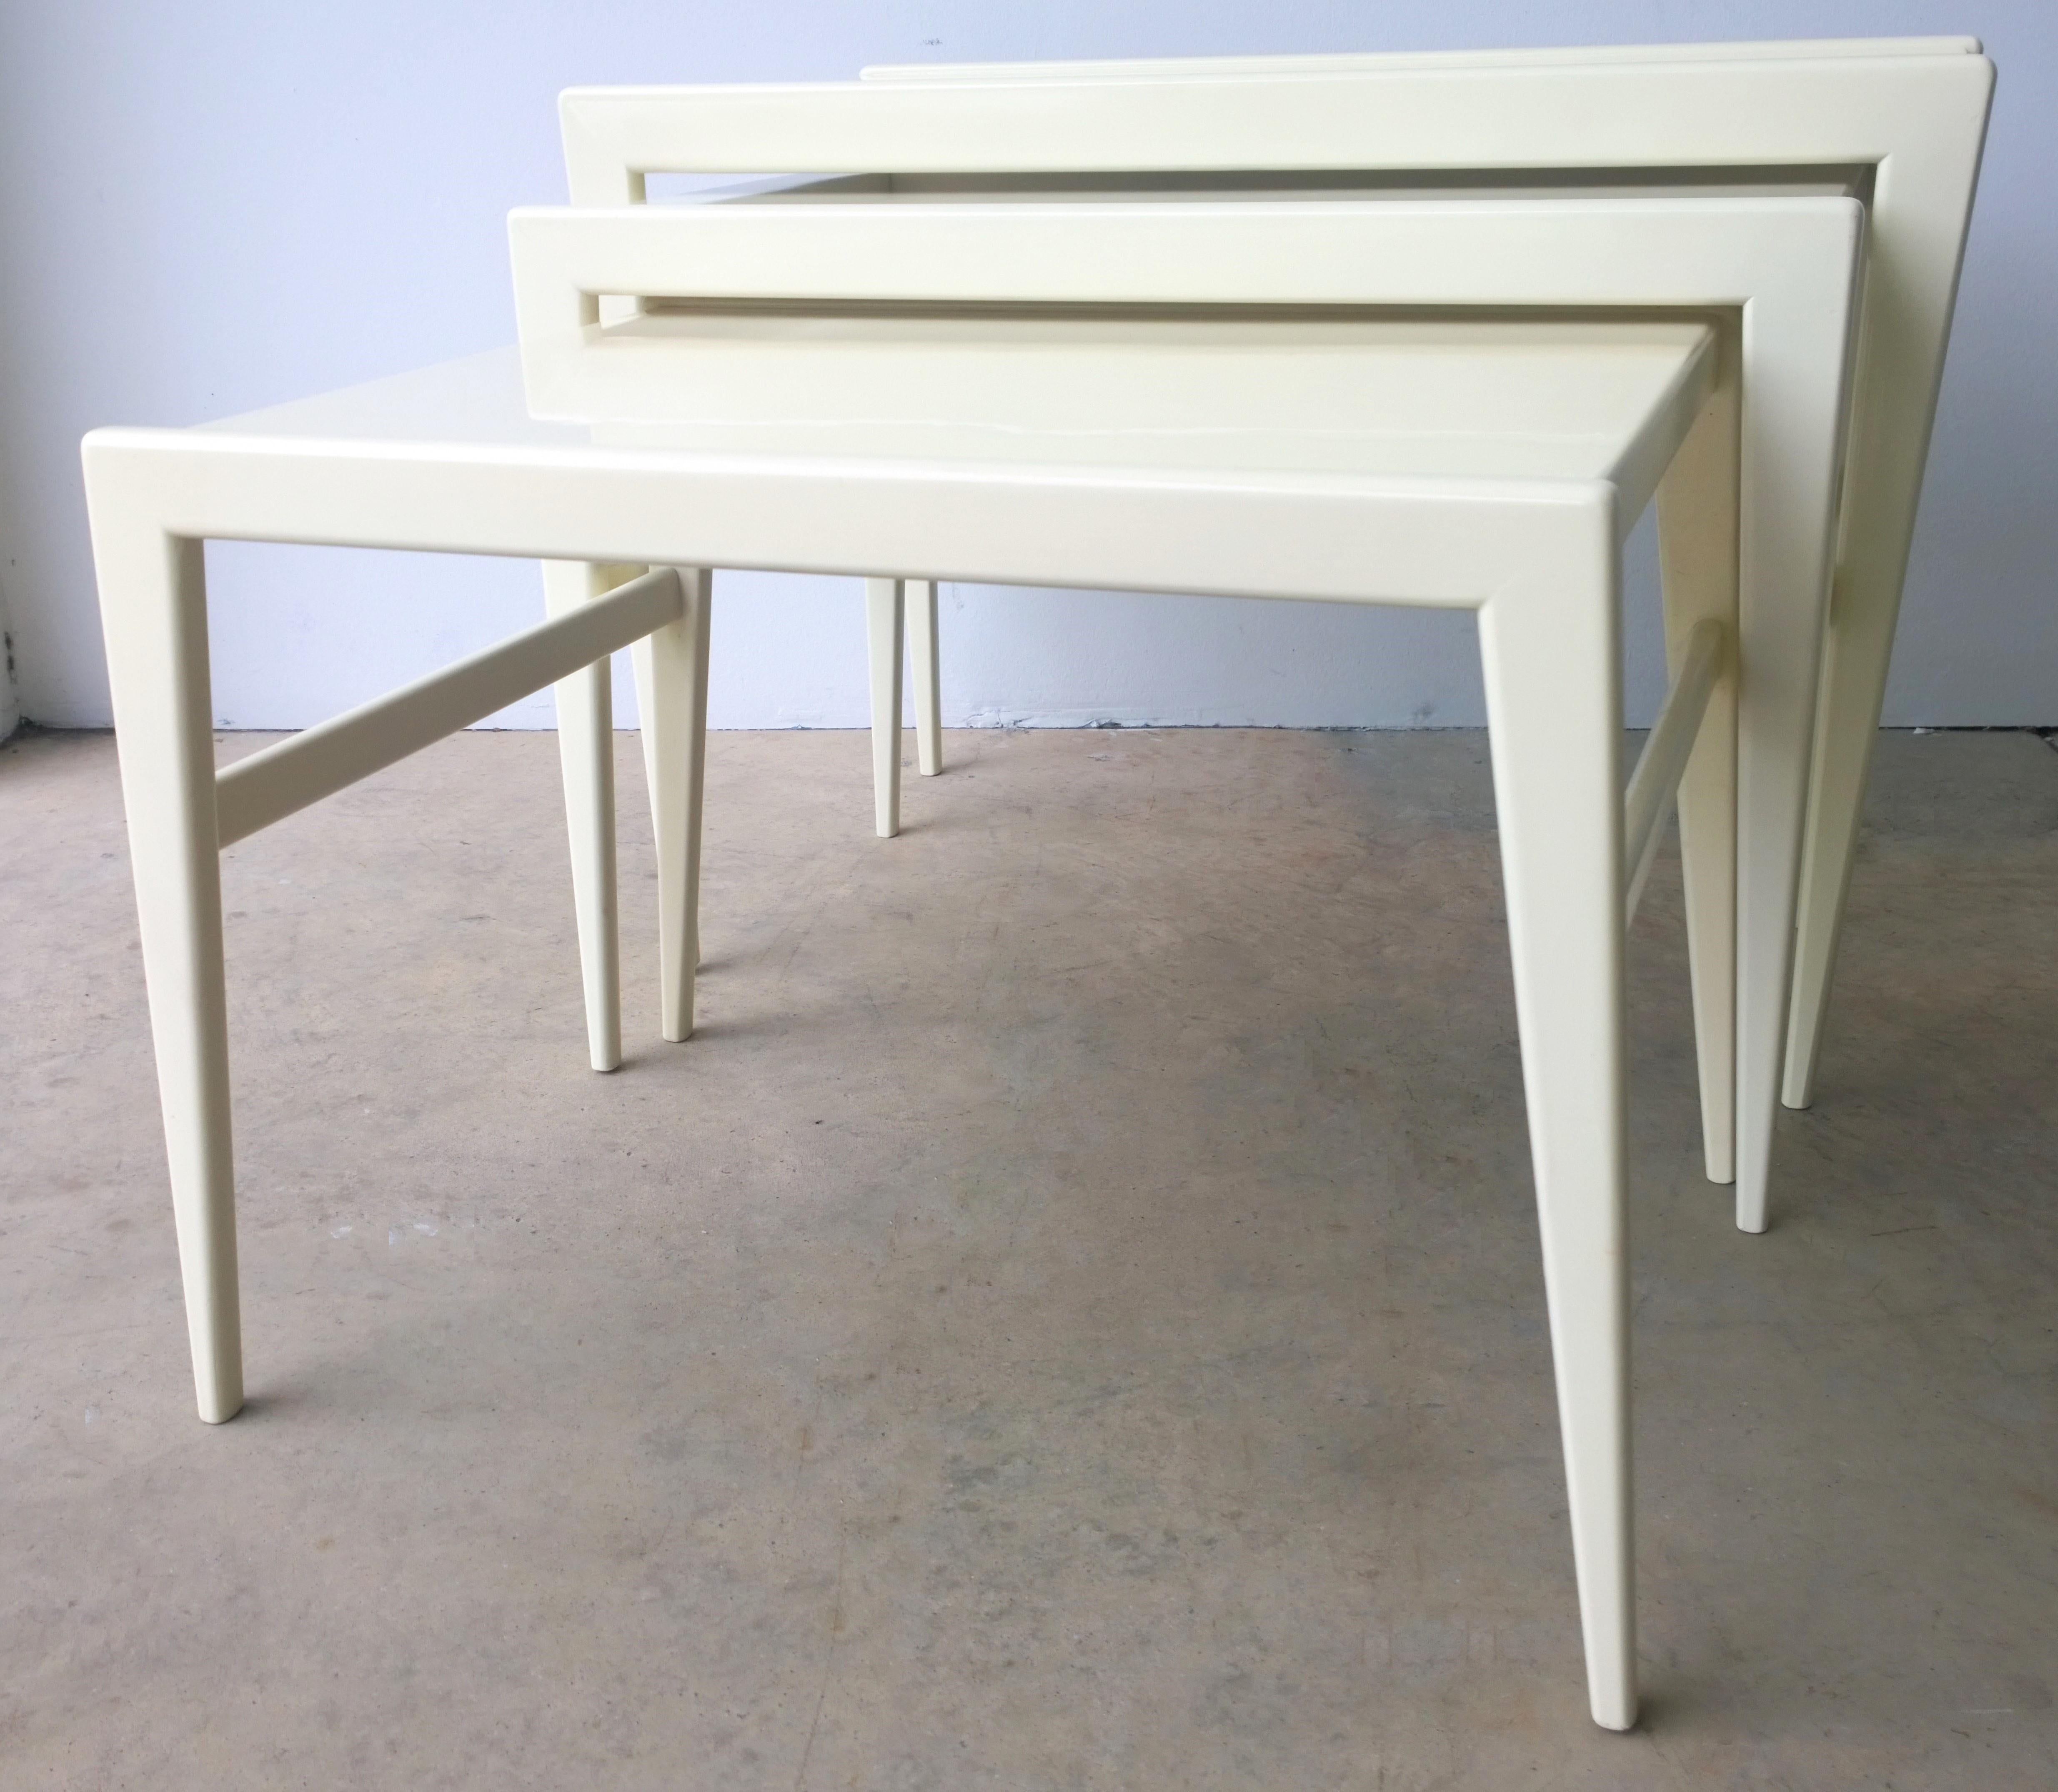 Ico Parisi / Singer & Son New Lacquer in Creamy White Wood S/3 Stacking Tables In Good Condition For Sale In Houston, TX